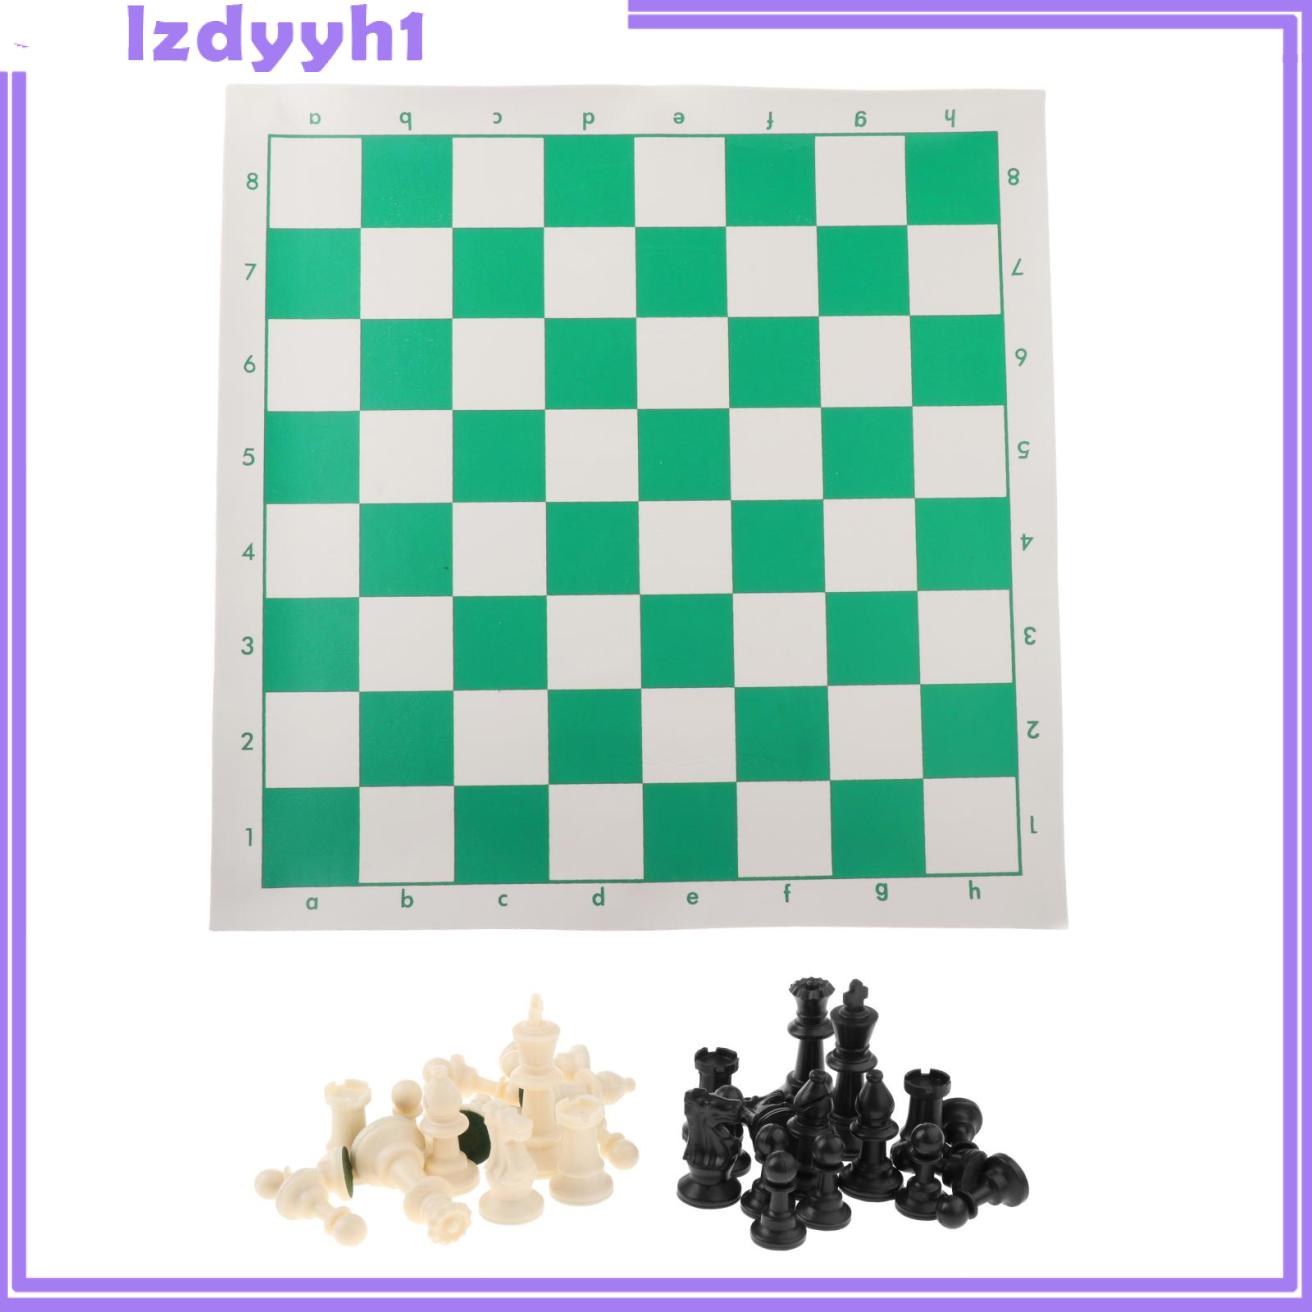 JoyDIY FOLDING PORTABLE CHESS SET BOARD GAME 15X3 INCH TOURNAMENT FOR KIDS HOME PARTY